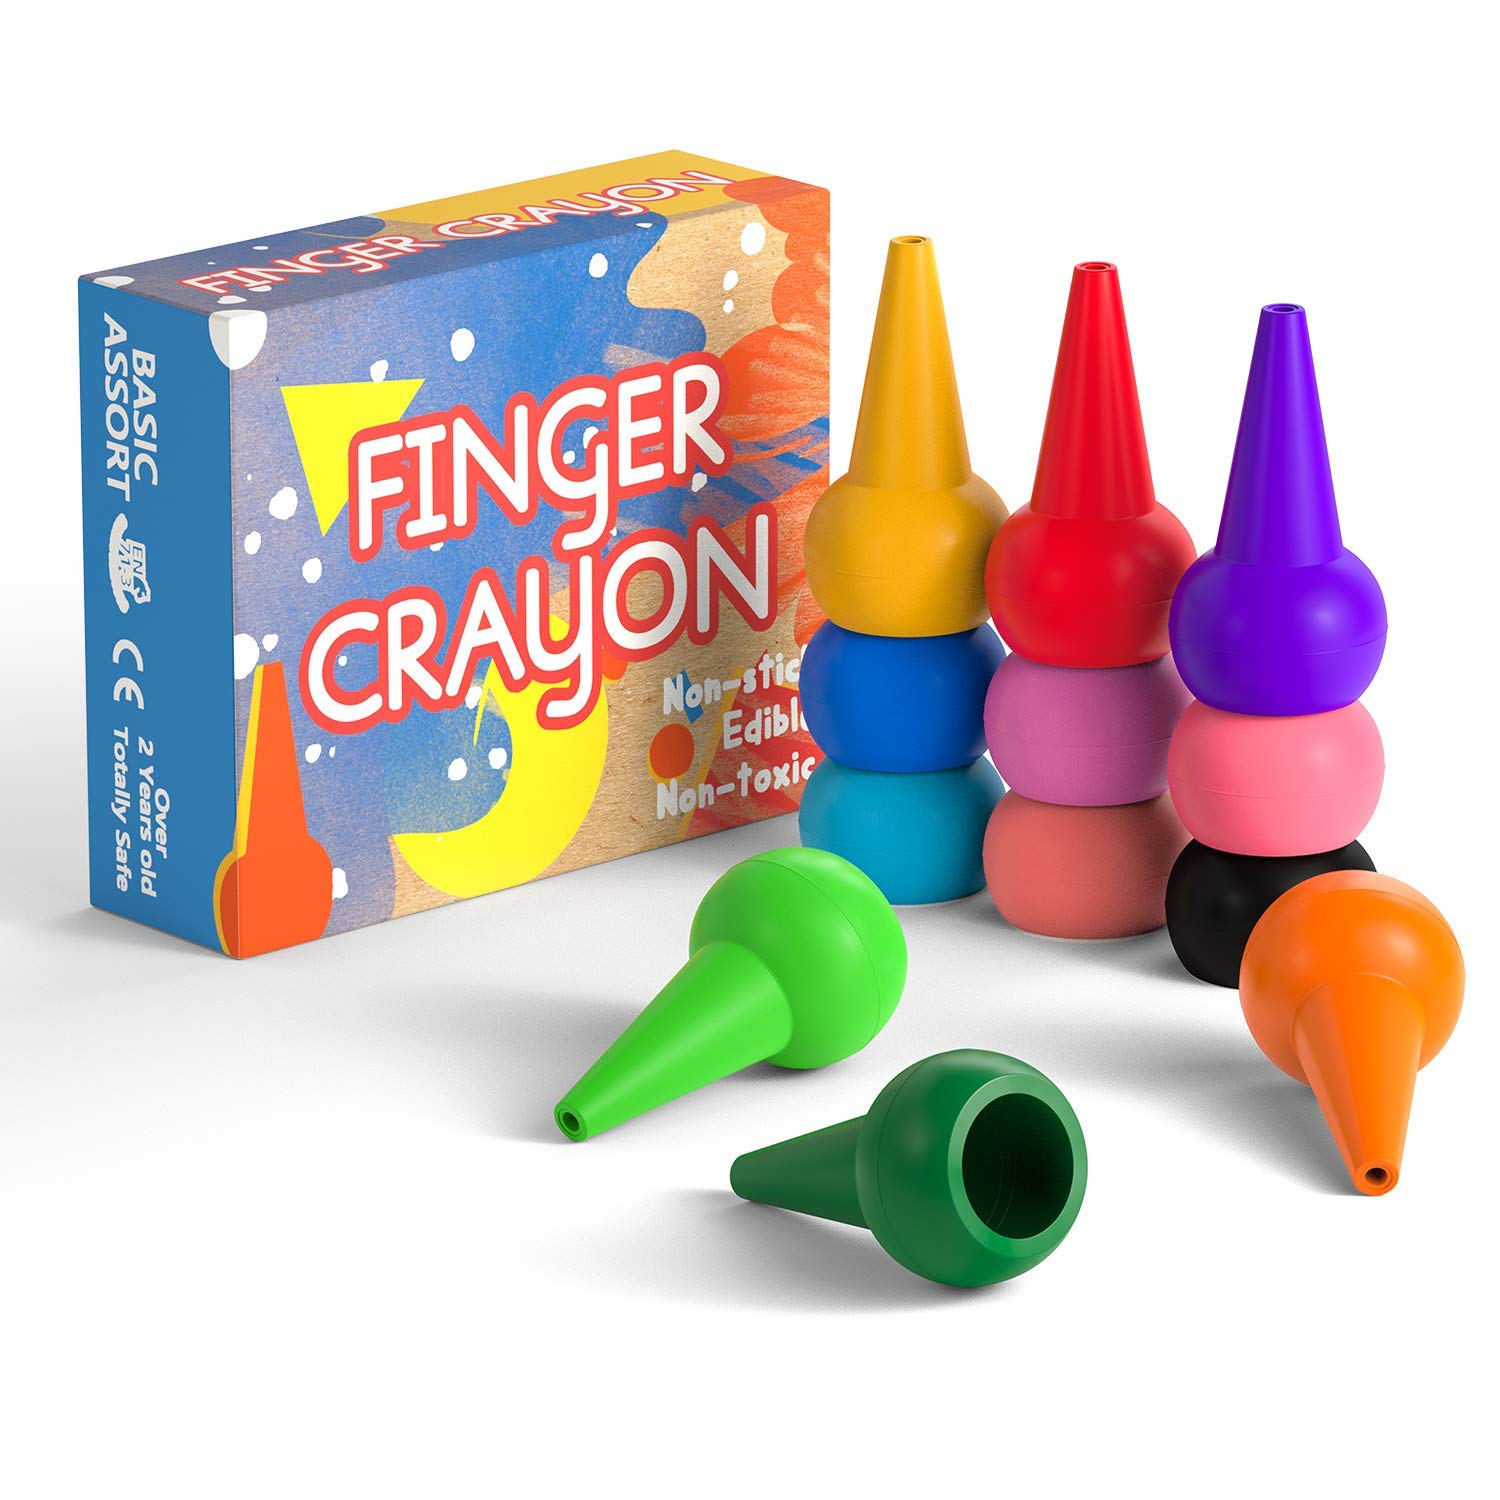 10 Best Crayons for Toddlers 2022 - Buying Guide & Reviews 5